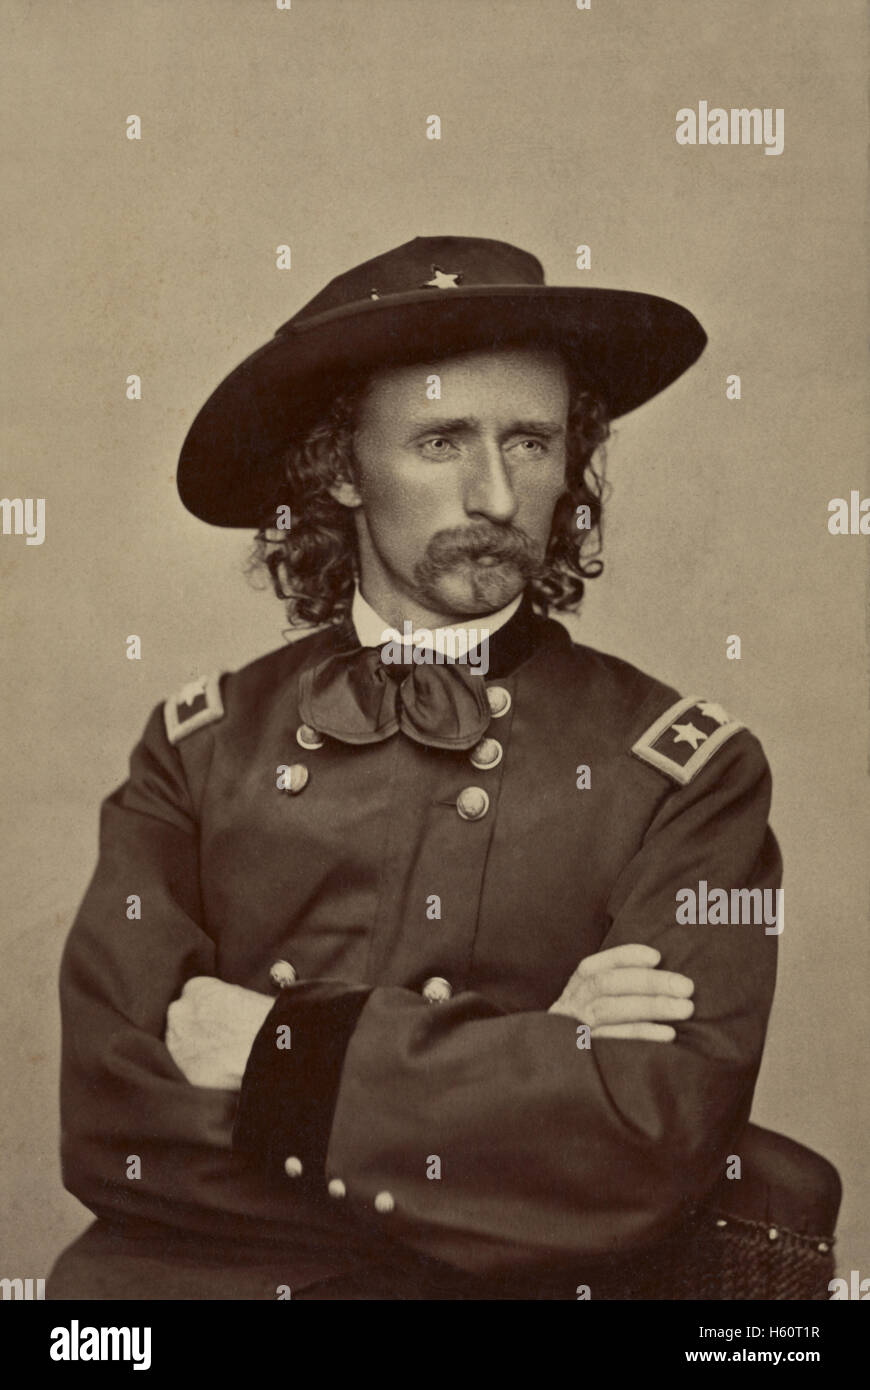 Major General George Armstrong Custer, Portrait in Uniform, Union Army, USA, 1865 Stock Photo